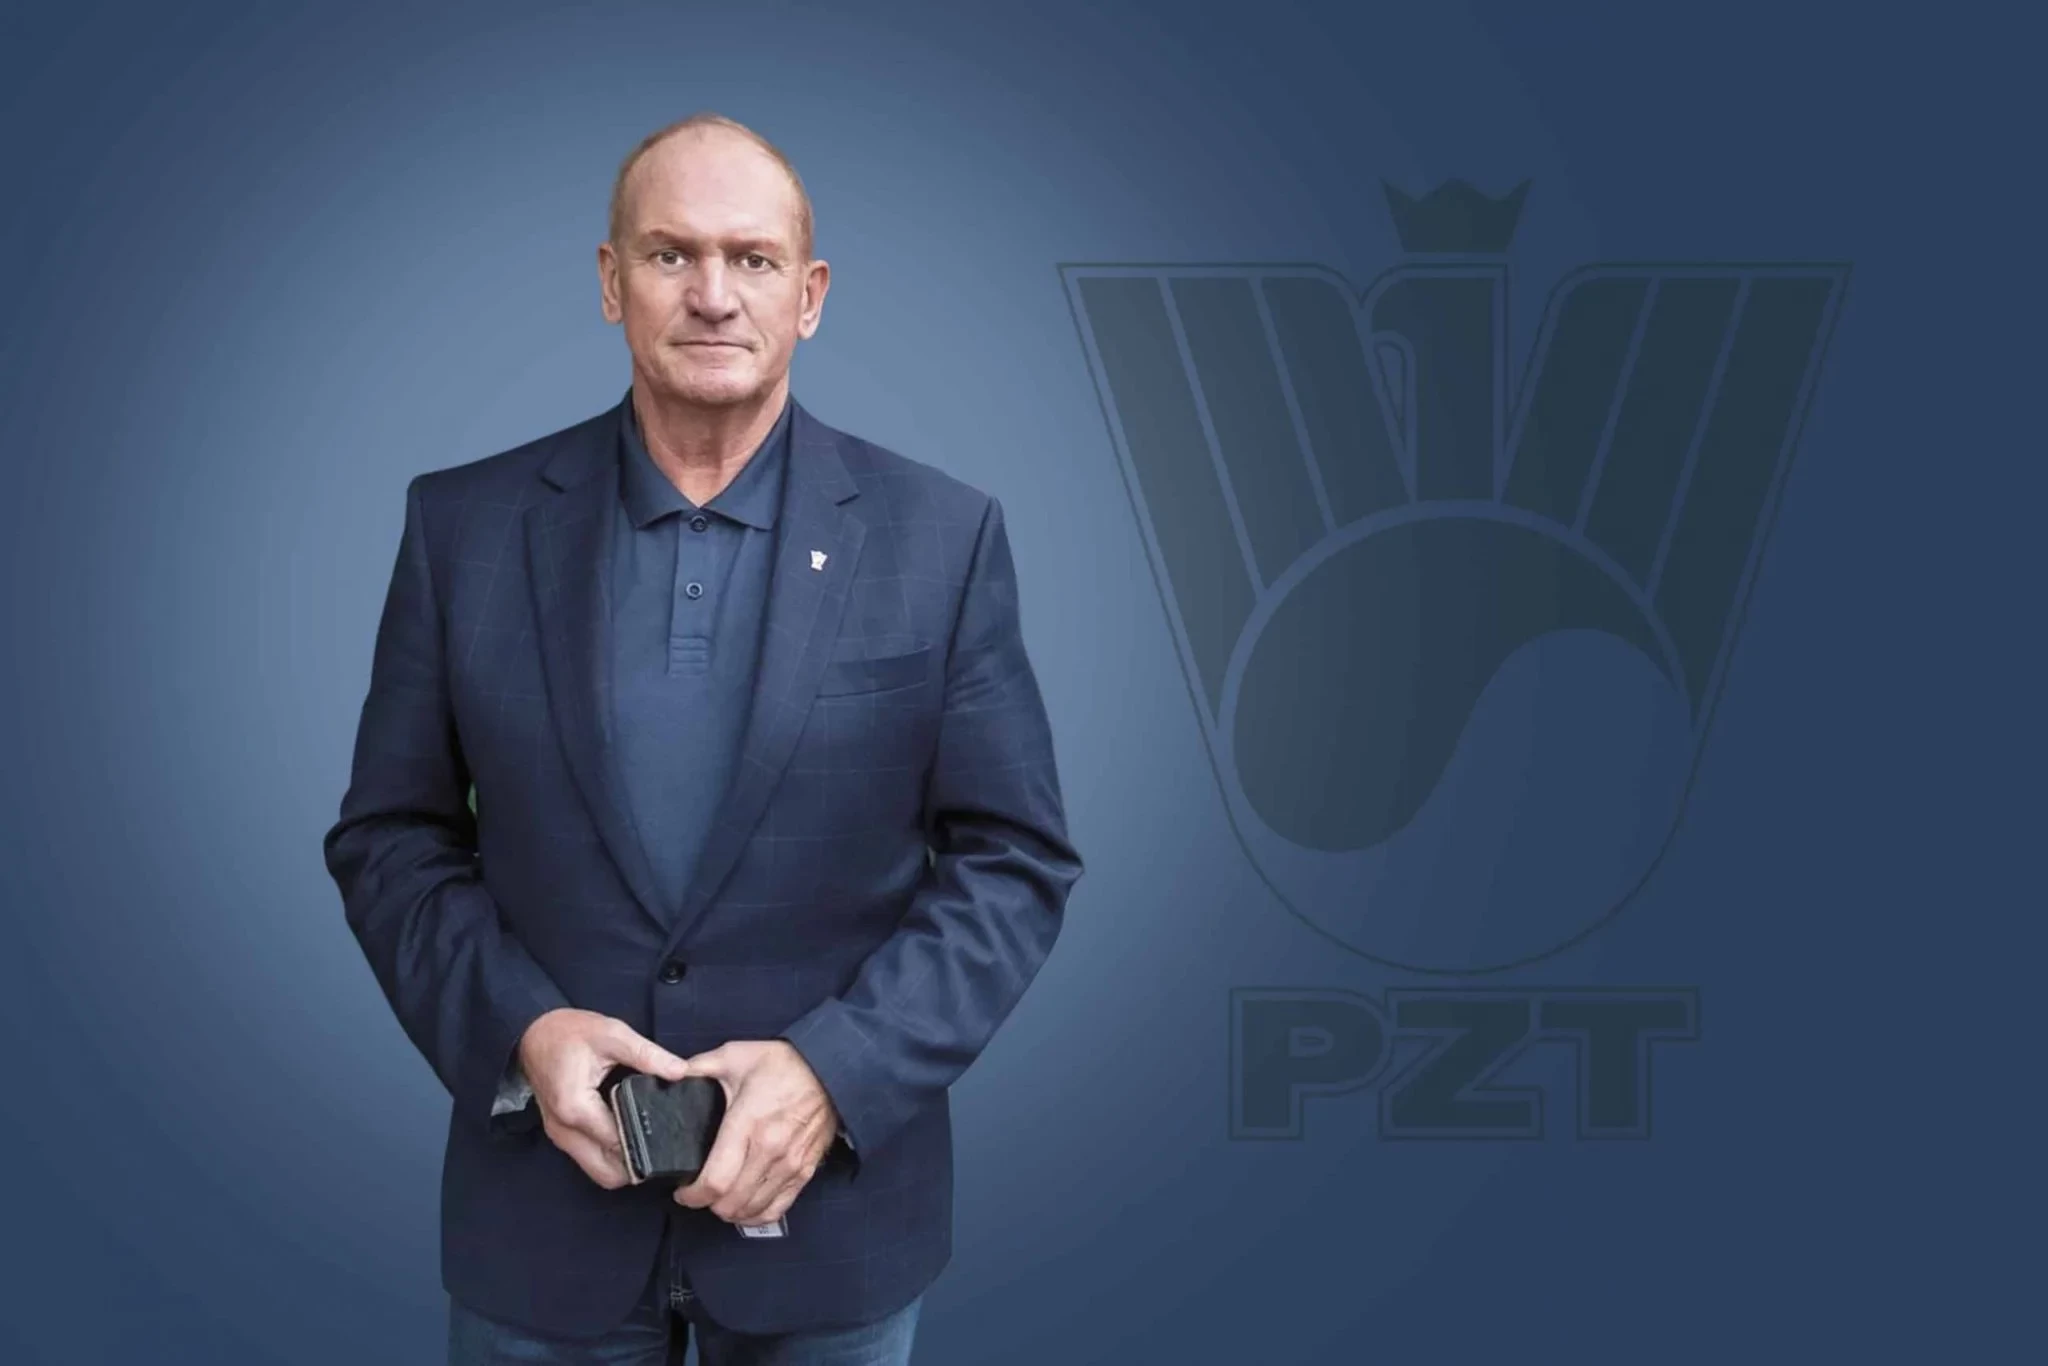 Polish Tennis Association President resigns following sexual abuse allegations 